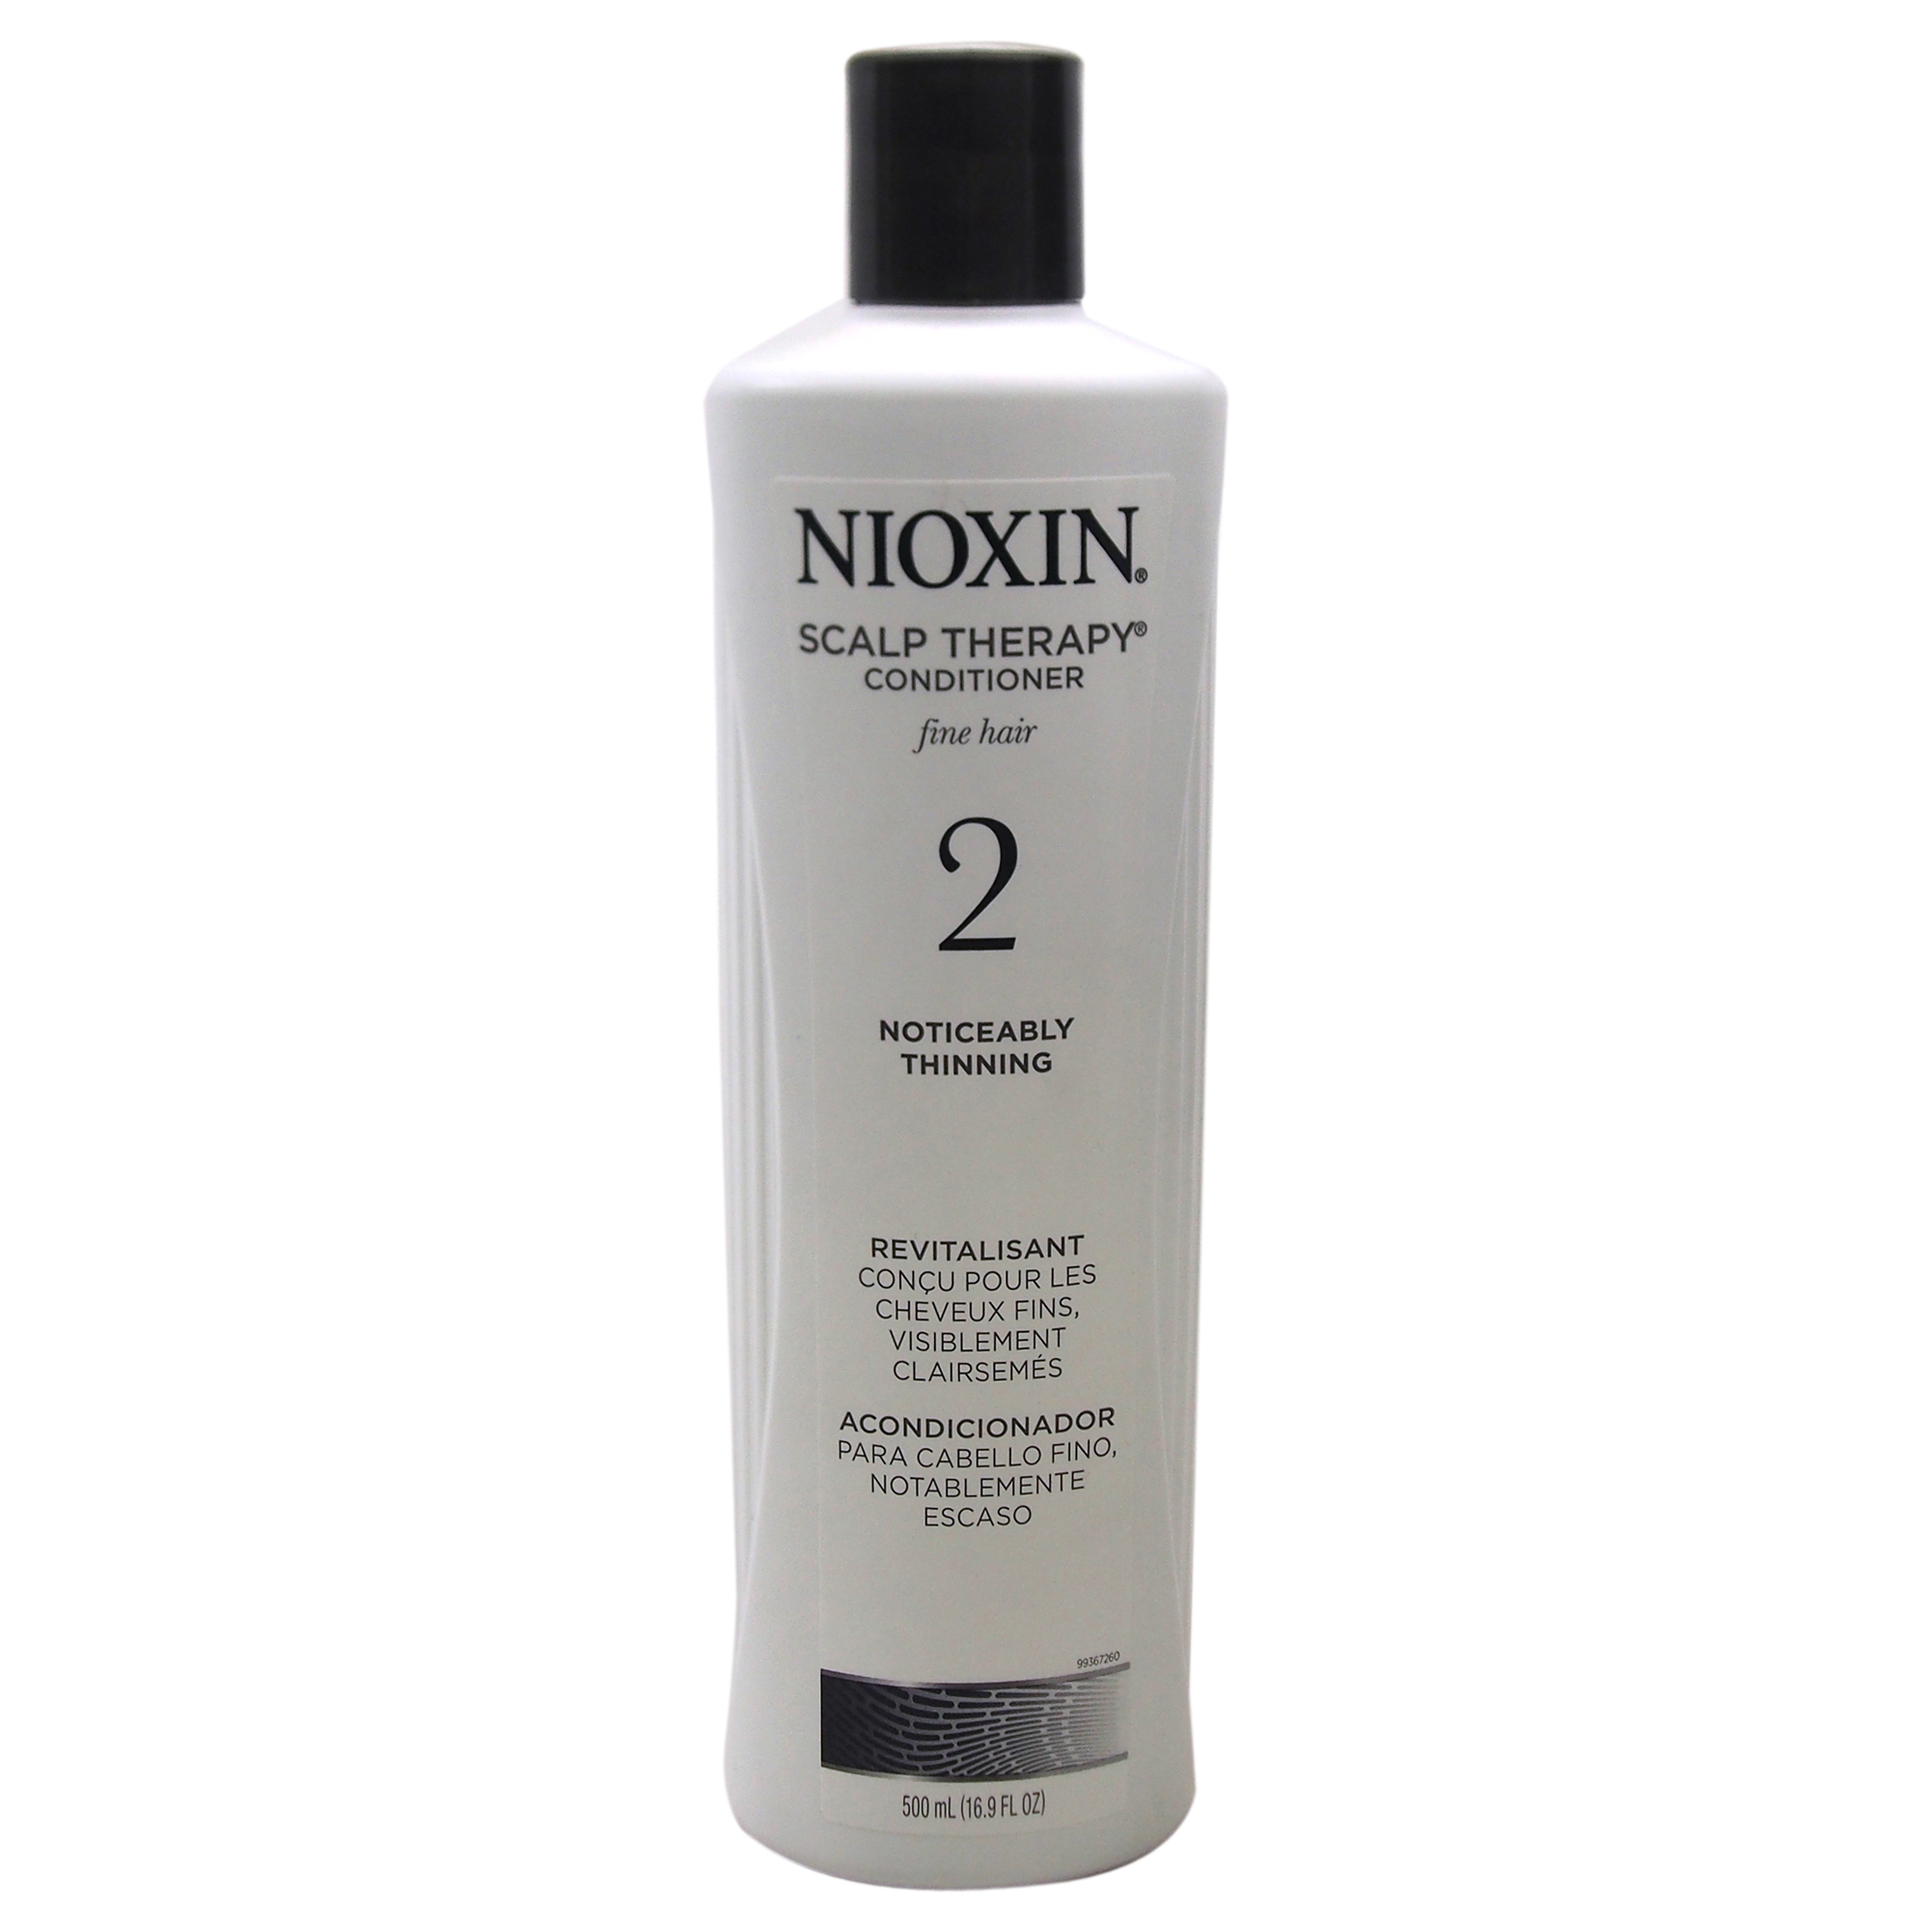 Nioxin System 2 Scalp Therapy Conditioner For Fine Hair Noticeably Thinning